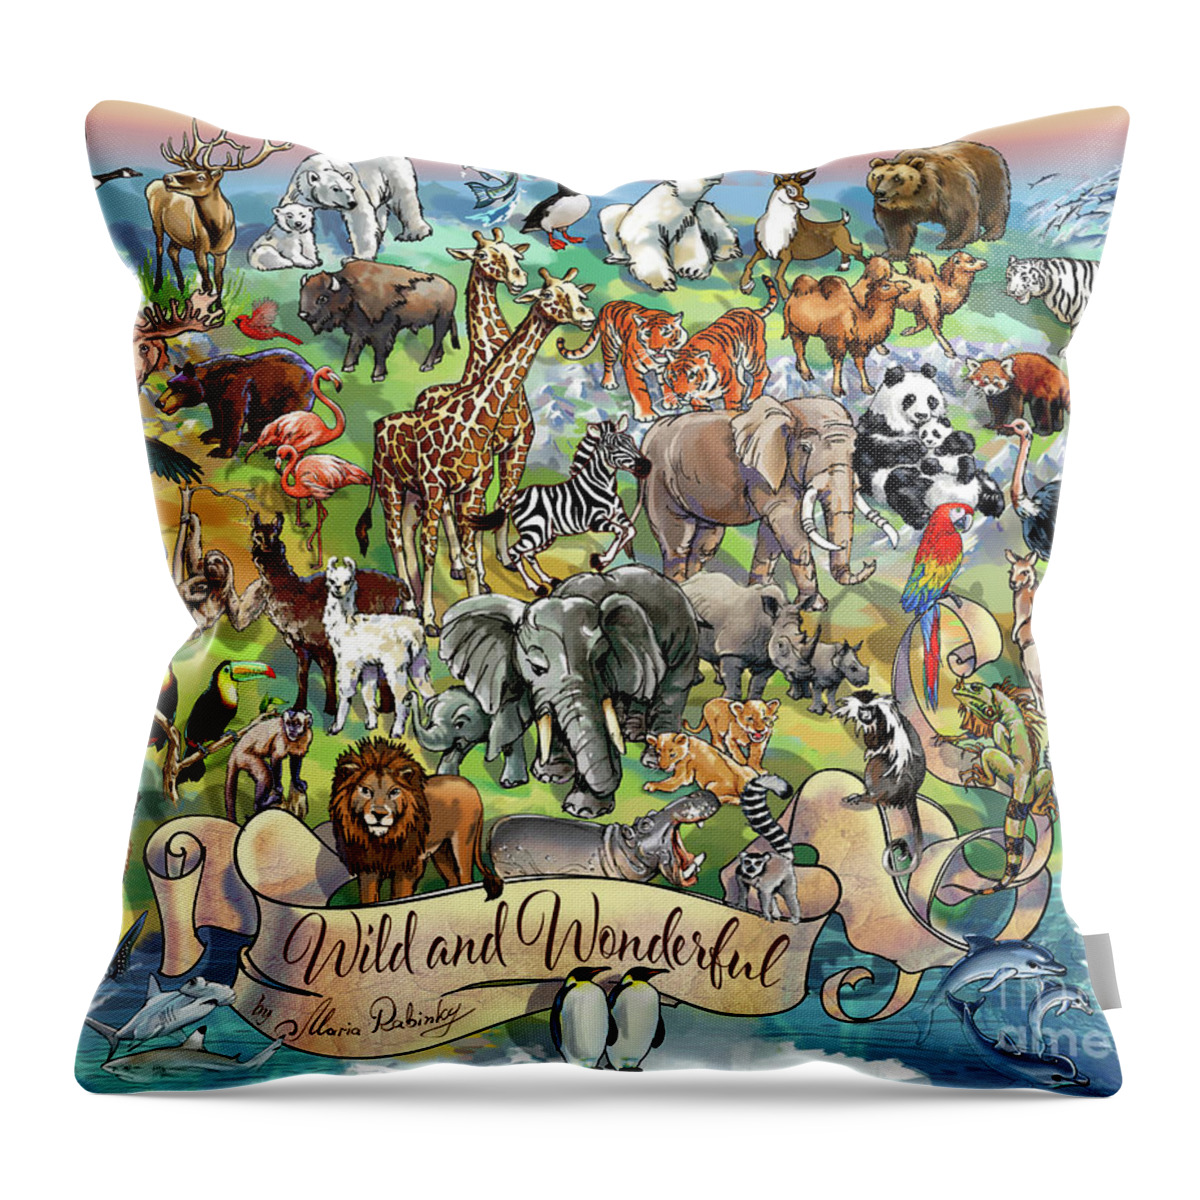 Illustration Throw Pillow featuring the digital art Wild and Wonderful Animals of the World by Maria Rabinky